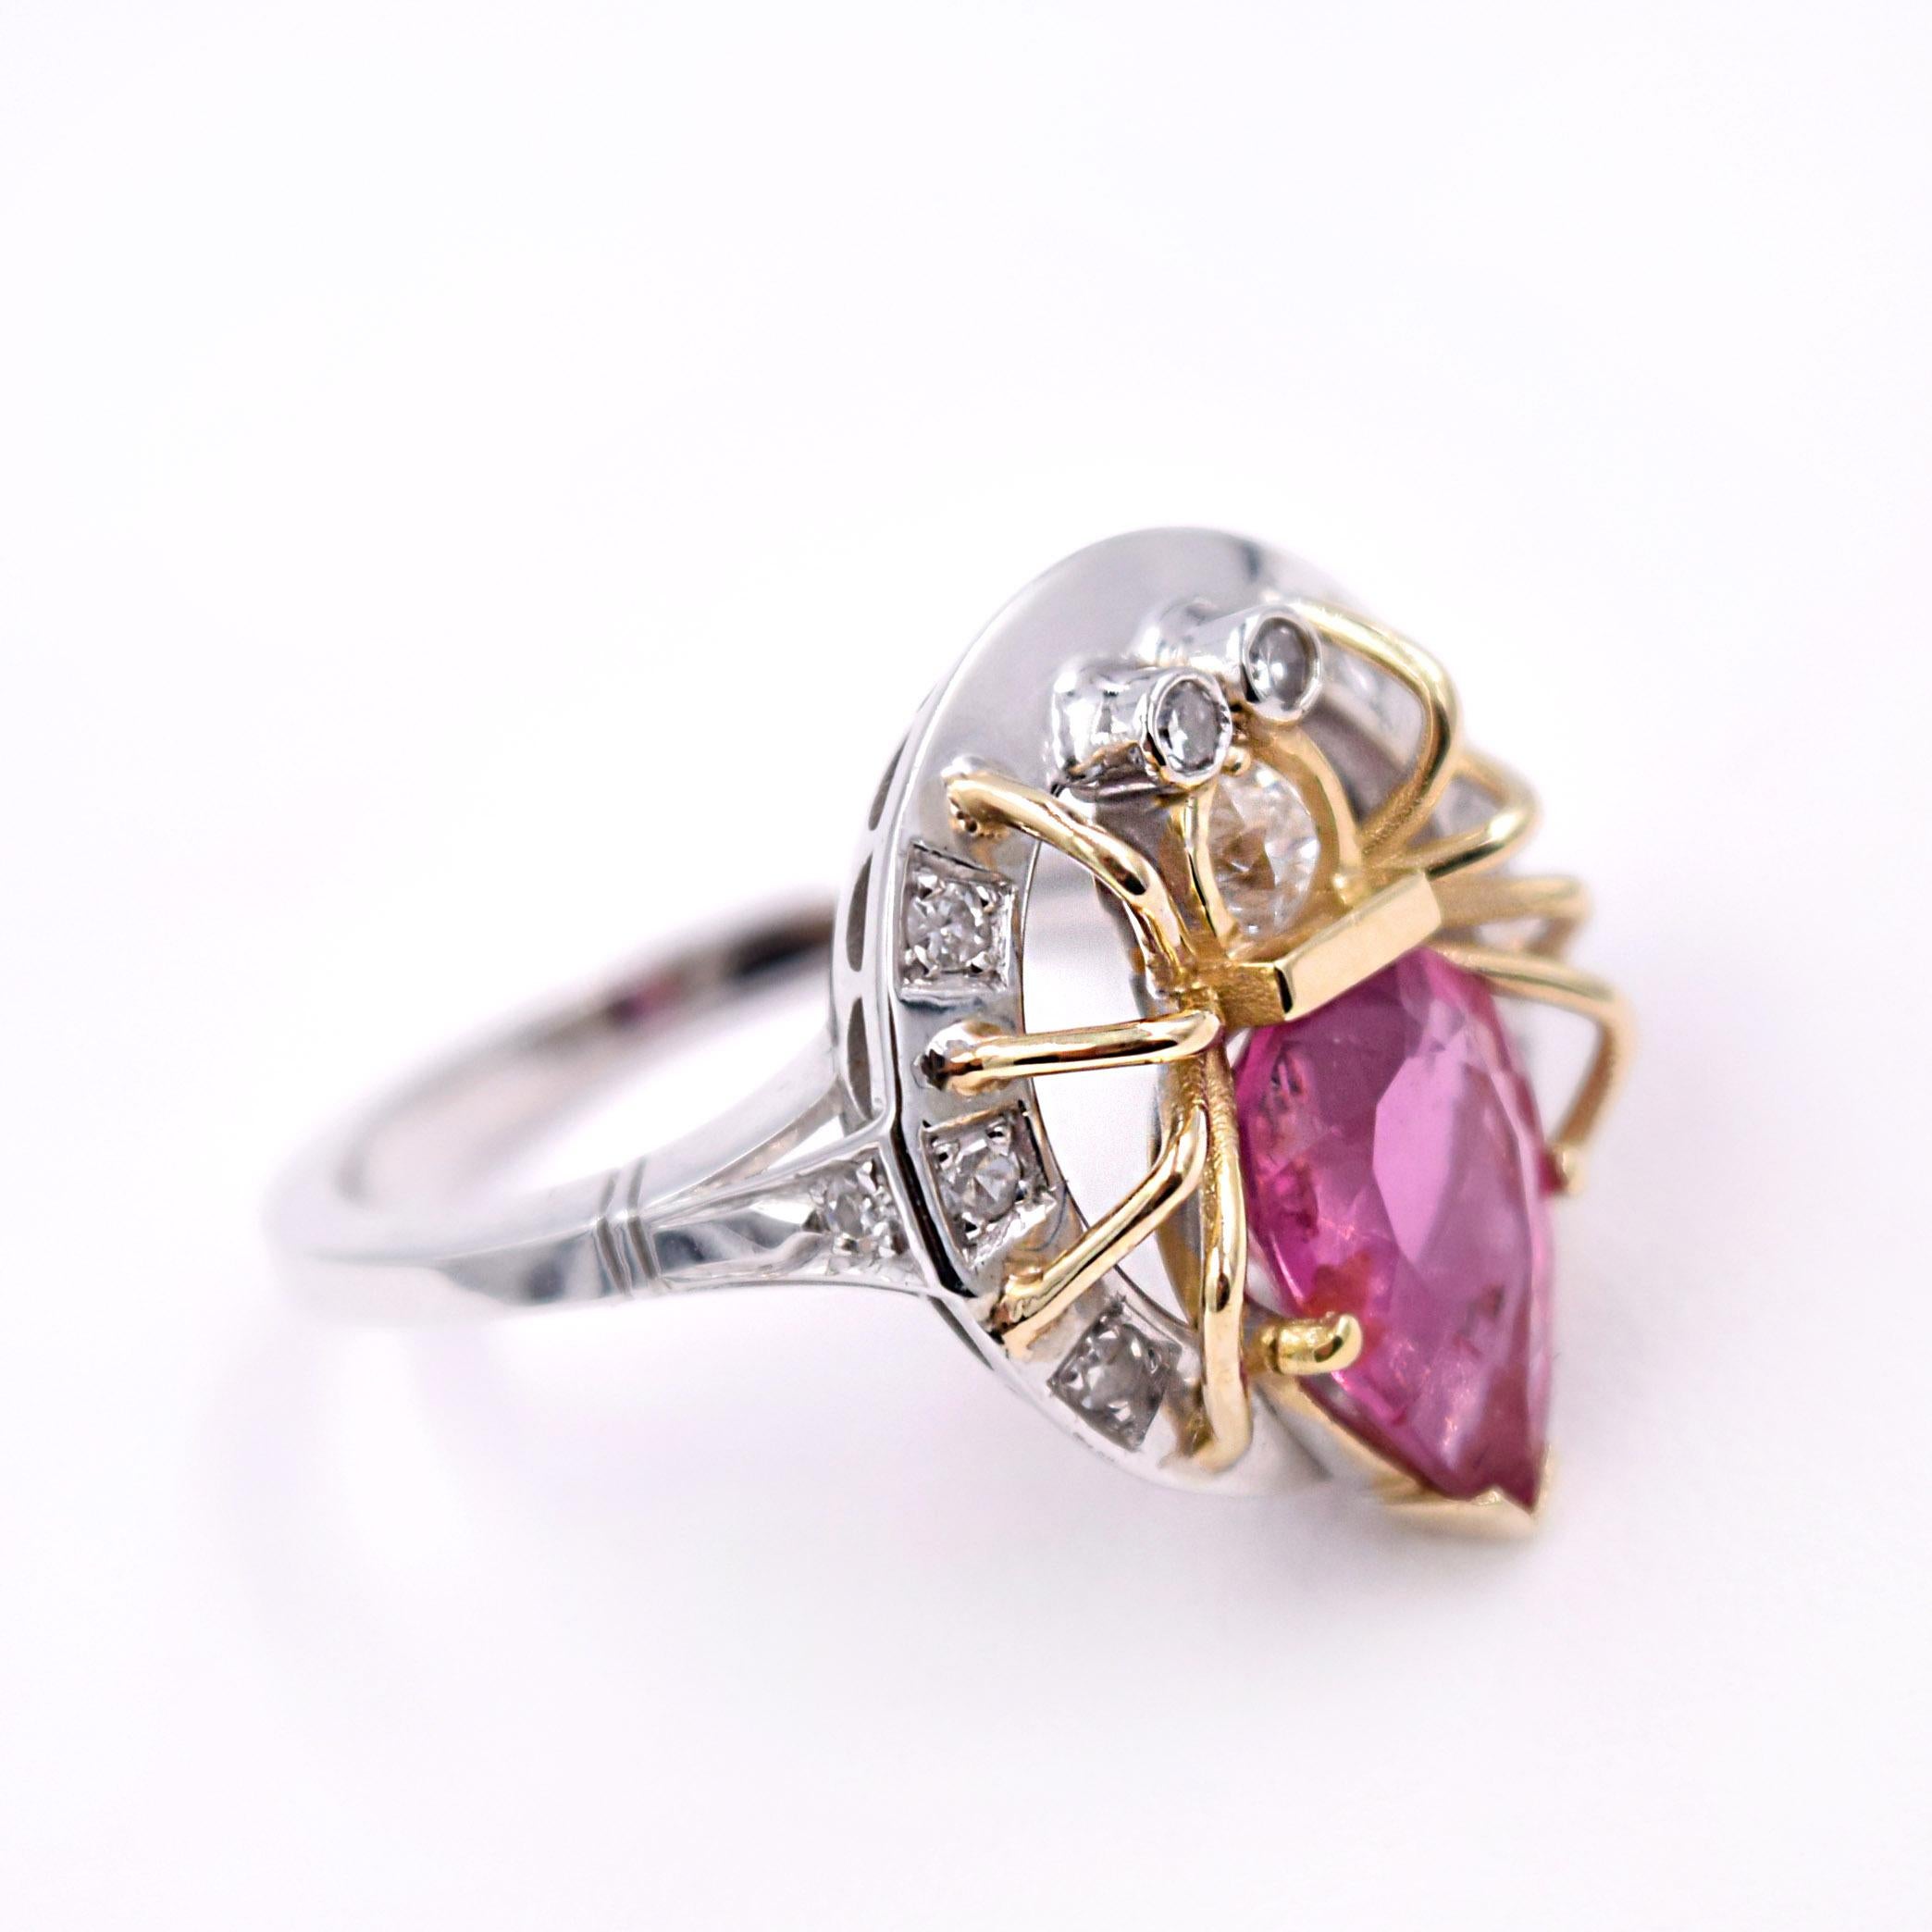 Tourmaline Spider Ring designed by Jennifer Weir.
2.90 Carat Pear shaped Pink Tourmaline and 0.20 Carat White Diamonds 
The metal is 14 Karat Yellow Gold and White Rhodium
Size of the ring is 7.75 and can be sized